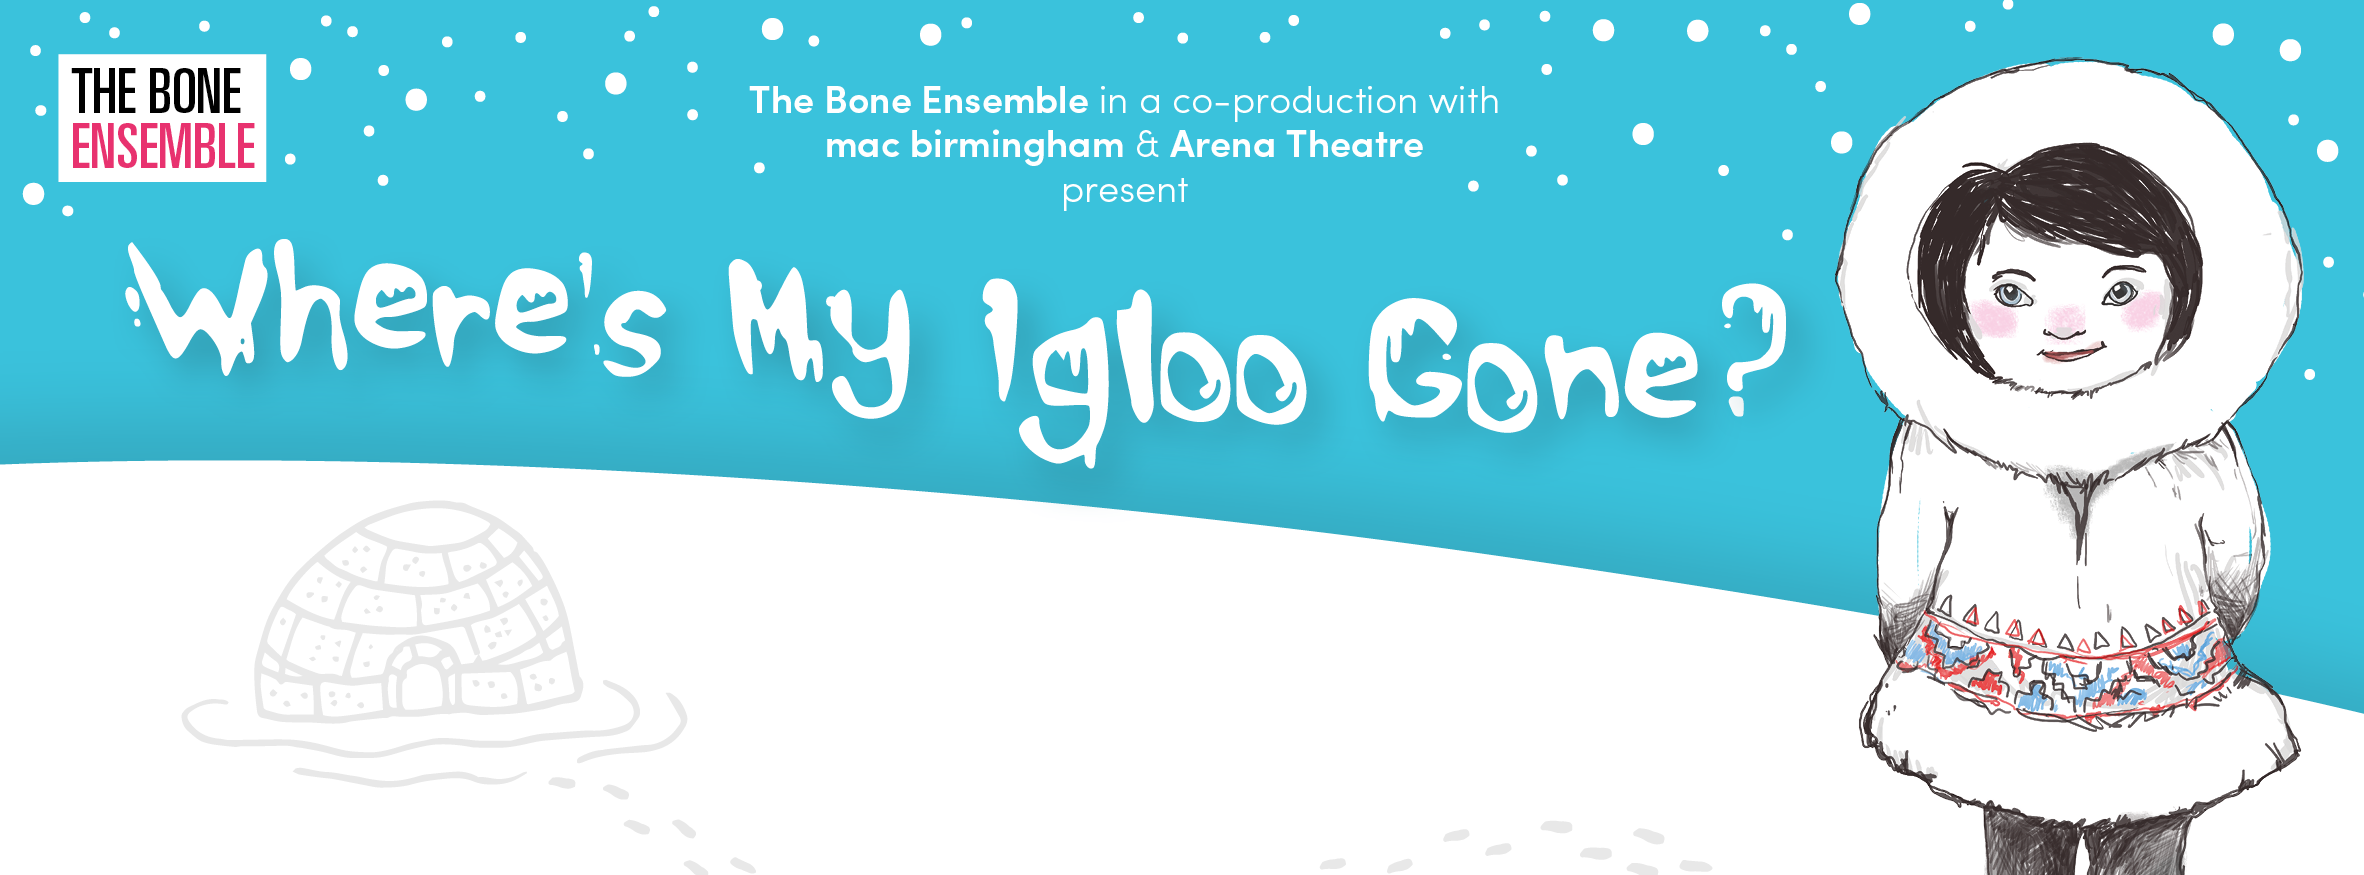 Where's My Igloo Gone? promotional banner